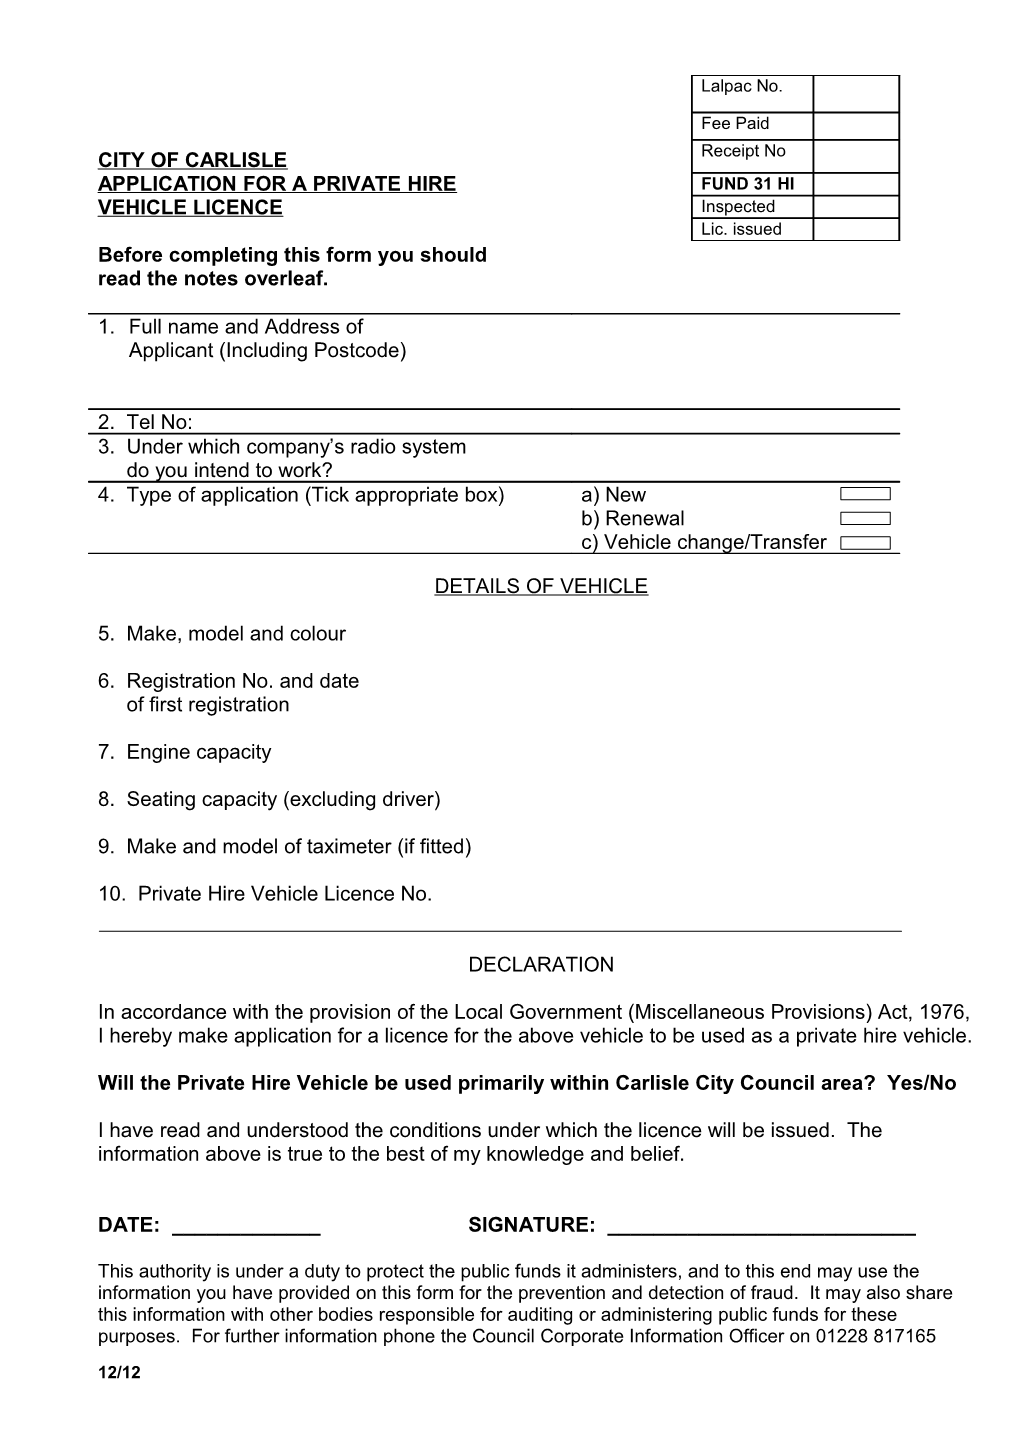 Application for a Private Hire